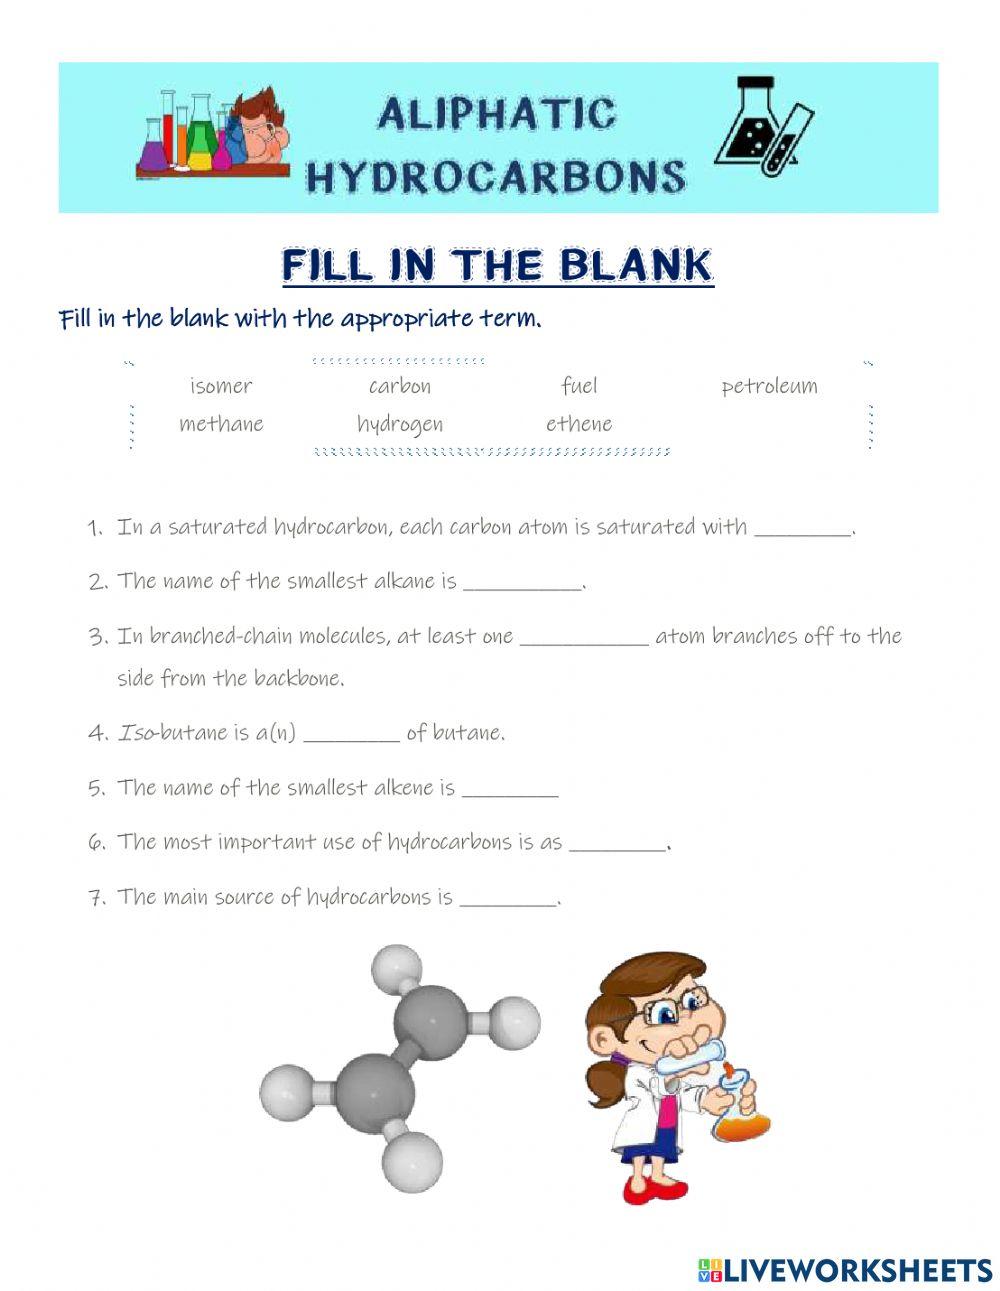 Aliphatic hydrocarbons fill in the blank